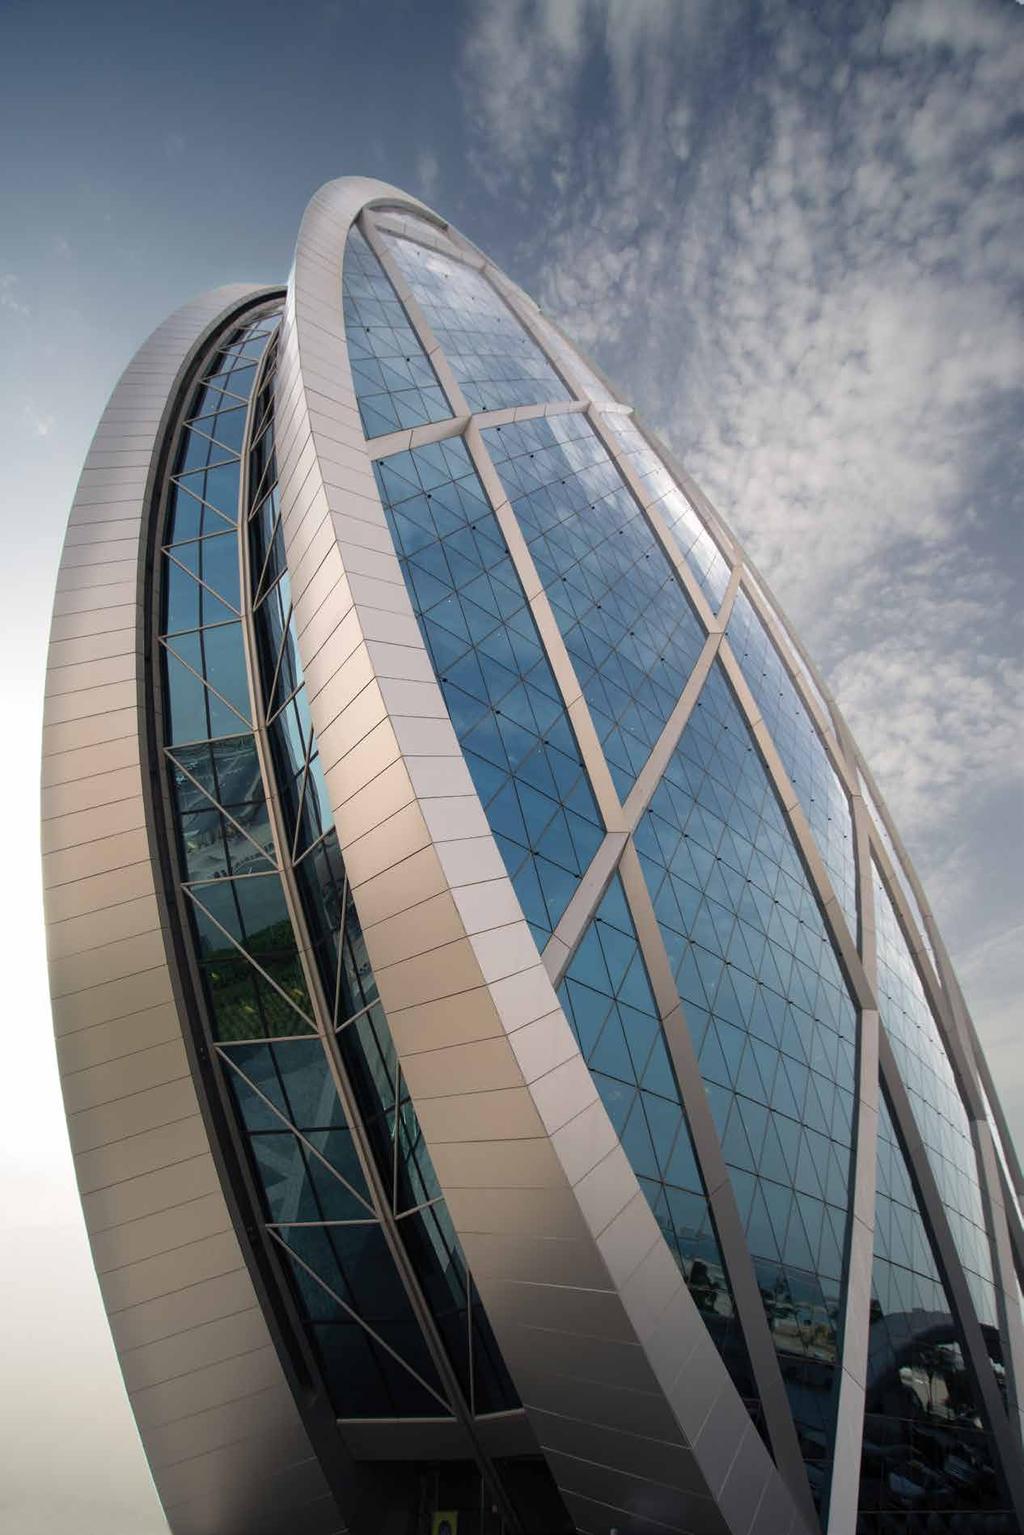 4 Aldar الدار ALDAR seeks to create quality, comfortable, desirable destinations that enrich the lives of Abu Dhabi residents as well as tourists within the Emirate.